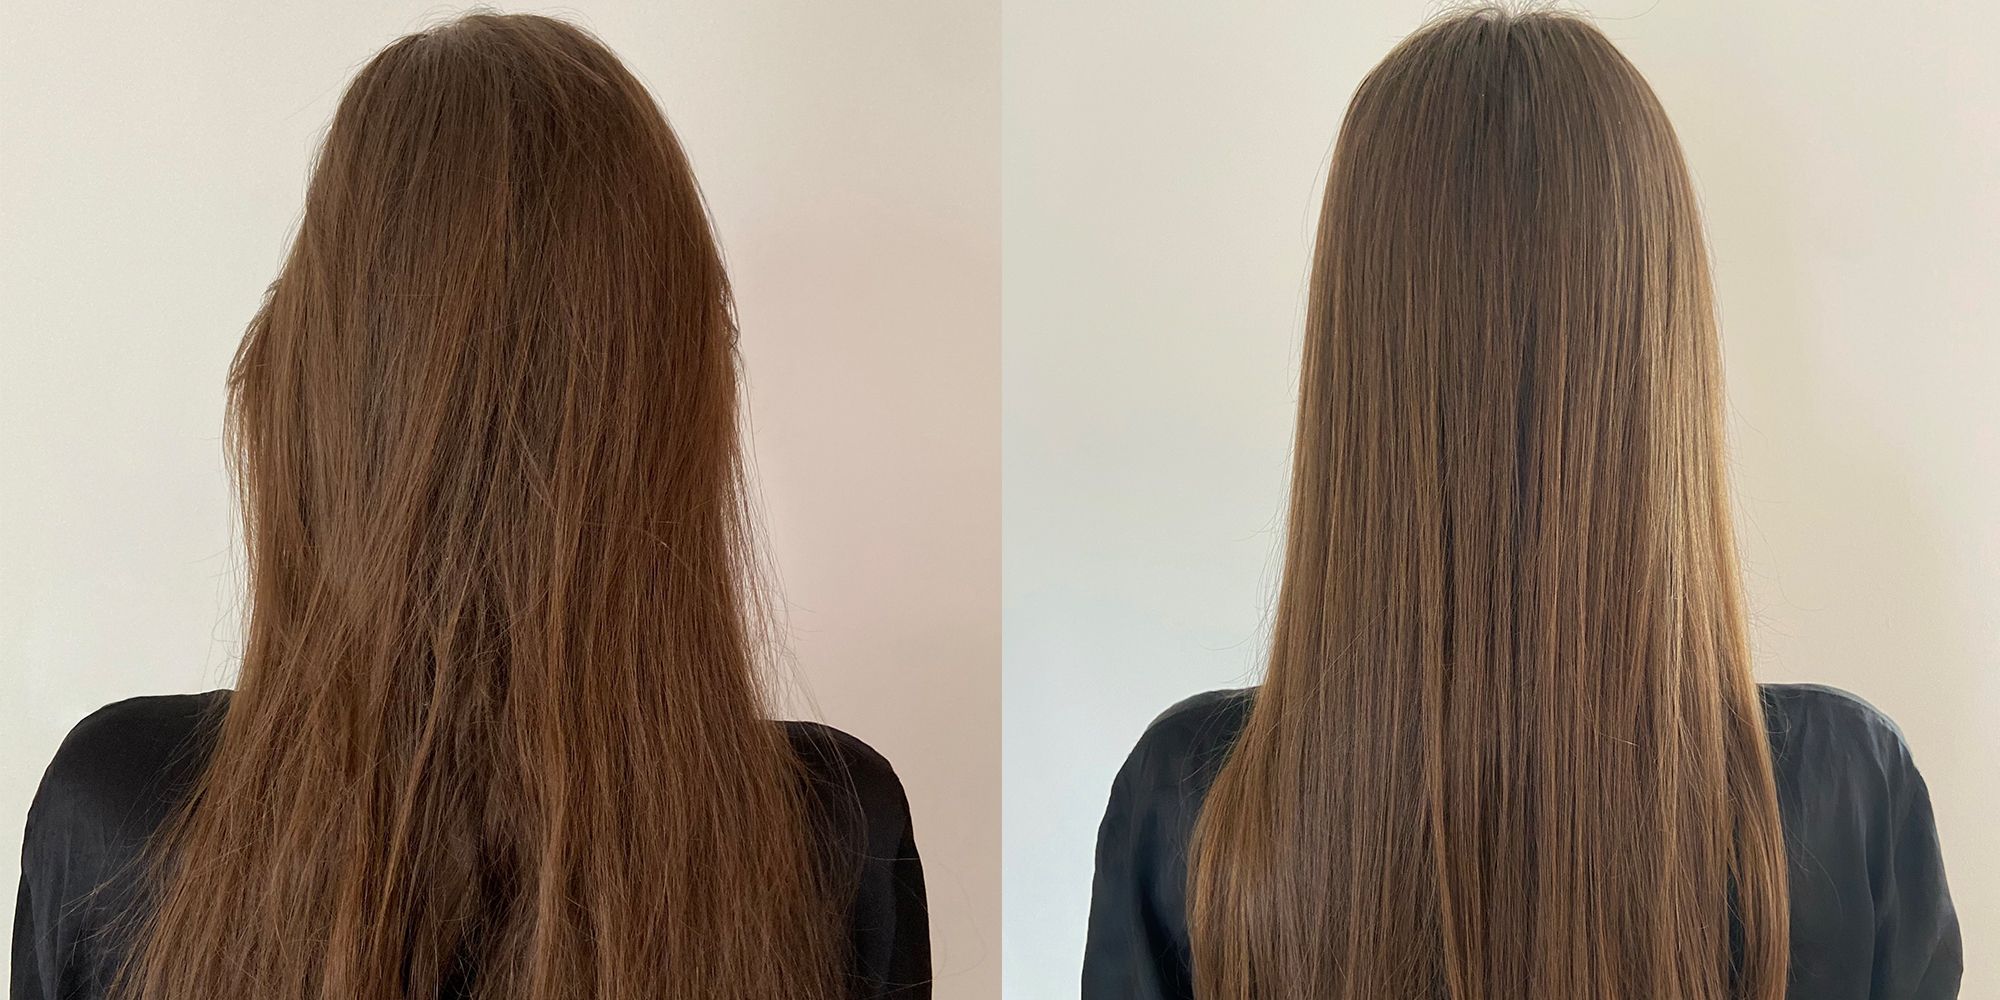 Olaplex 3 reviews before and after